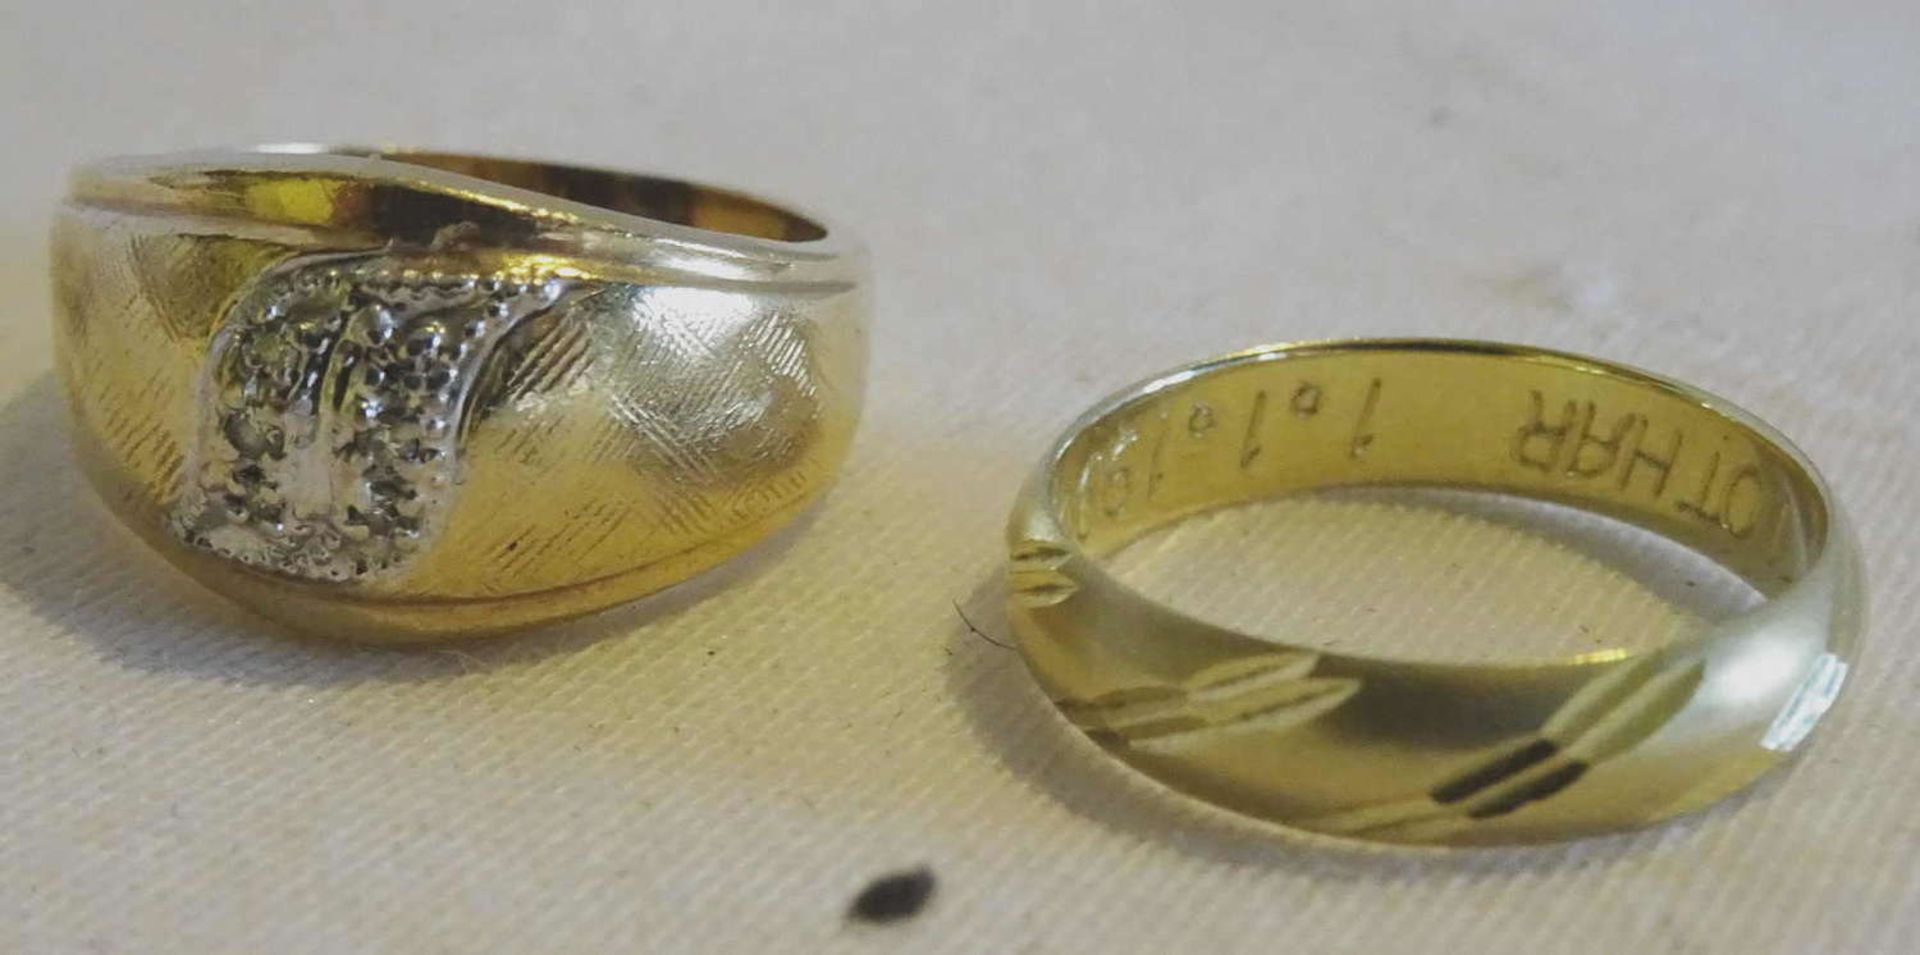 2 women's rings, 585 yellow gold, 1x with internal engraving. Weight about 7 gr.